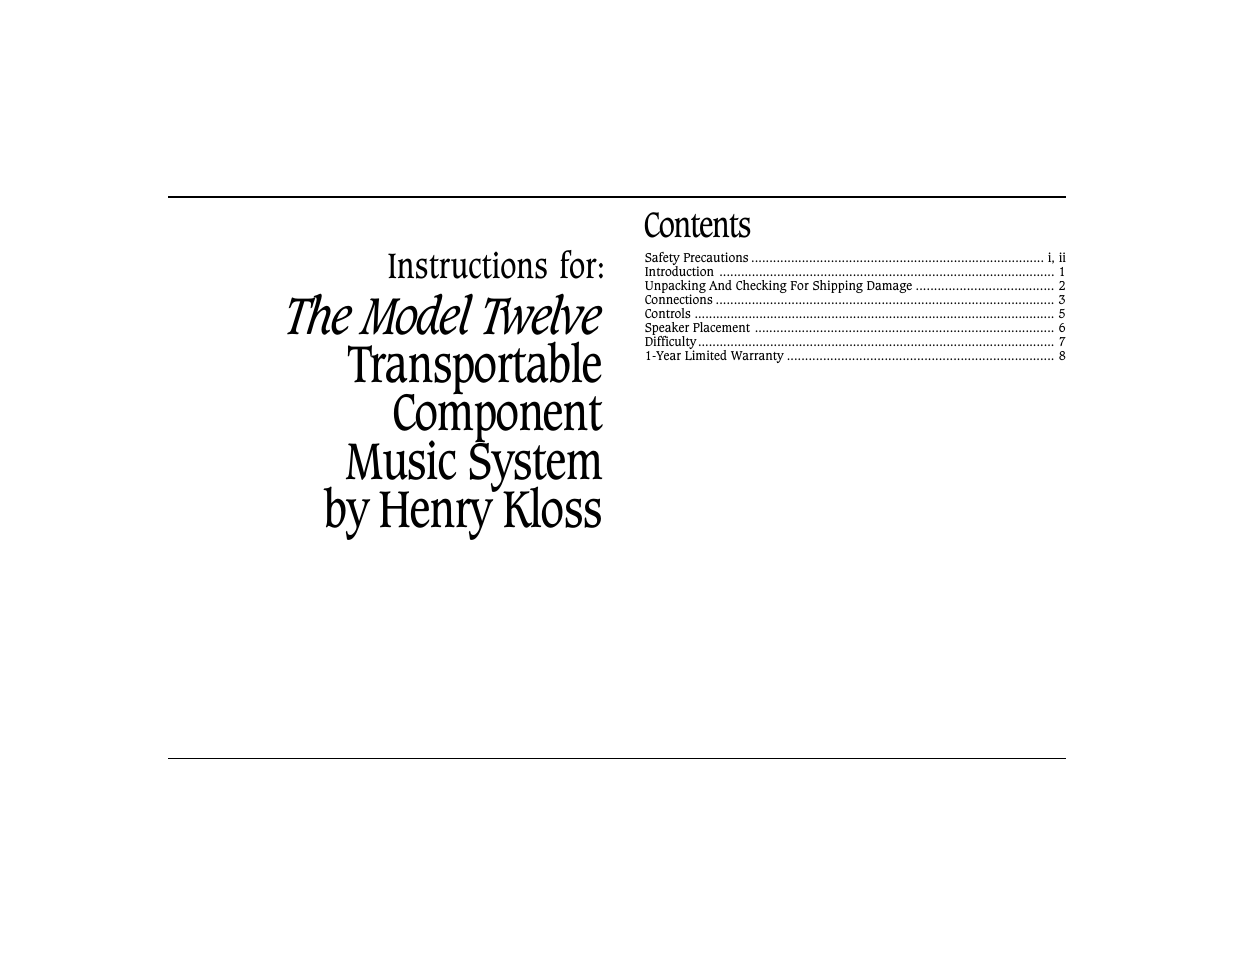 The Model Twelve Transportable Componenet Music System by Henry Kloss